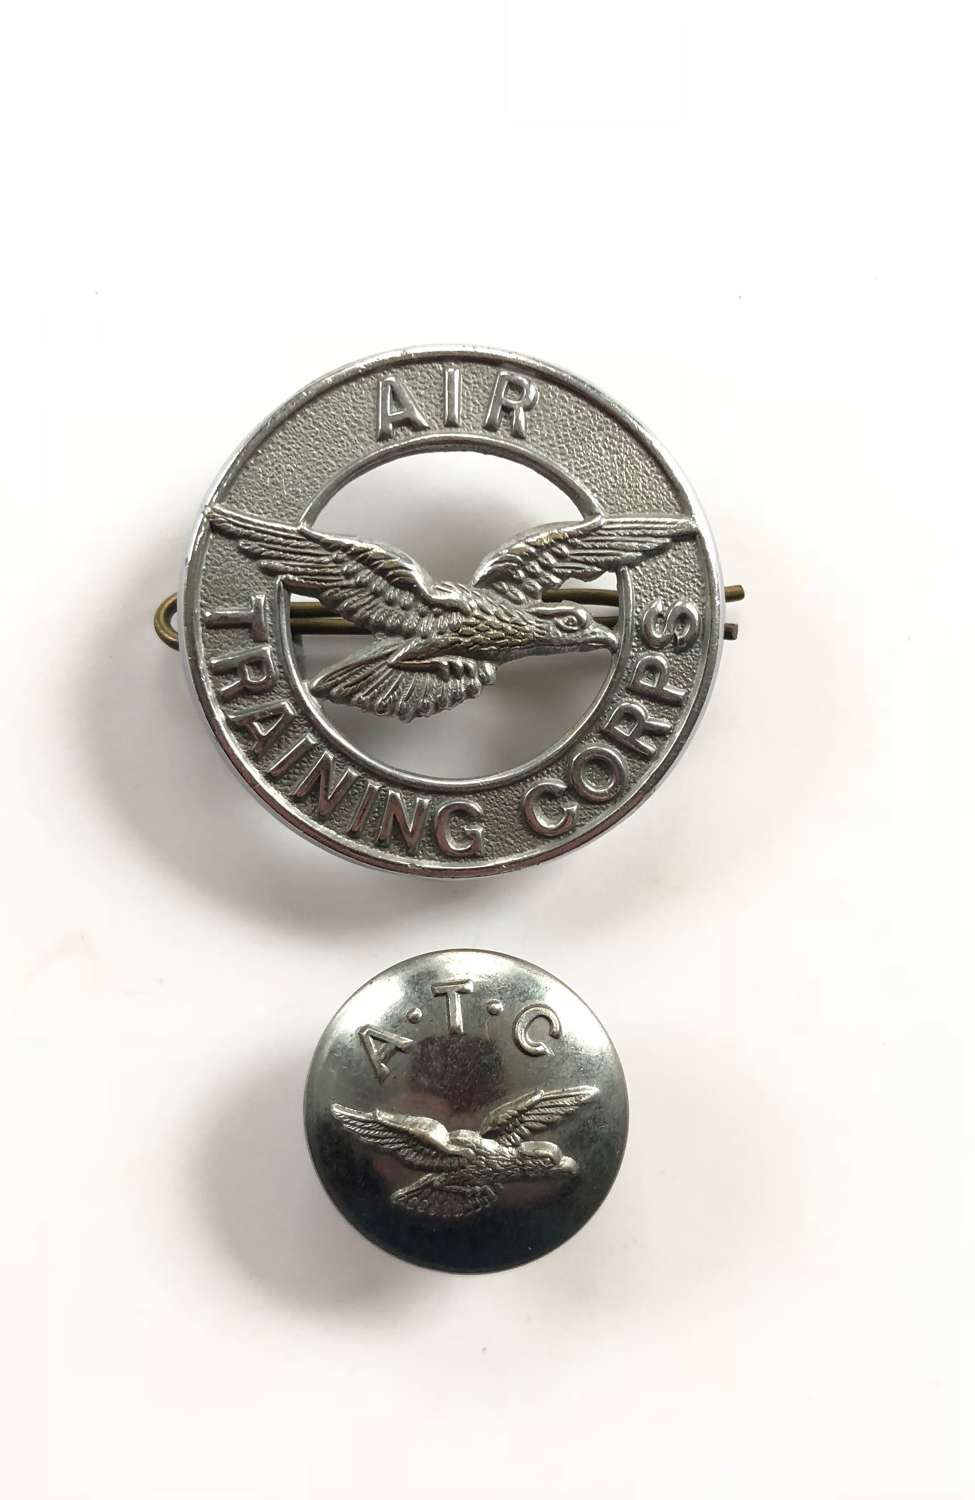 Air Training Corps ATC RAF Cap Badge and Button.